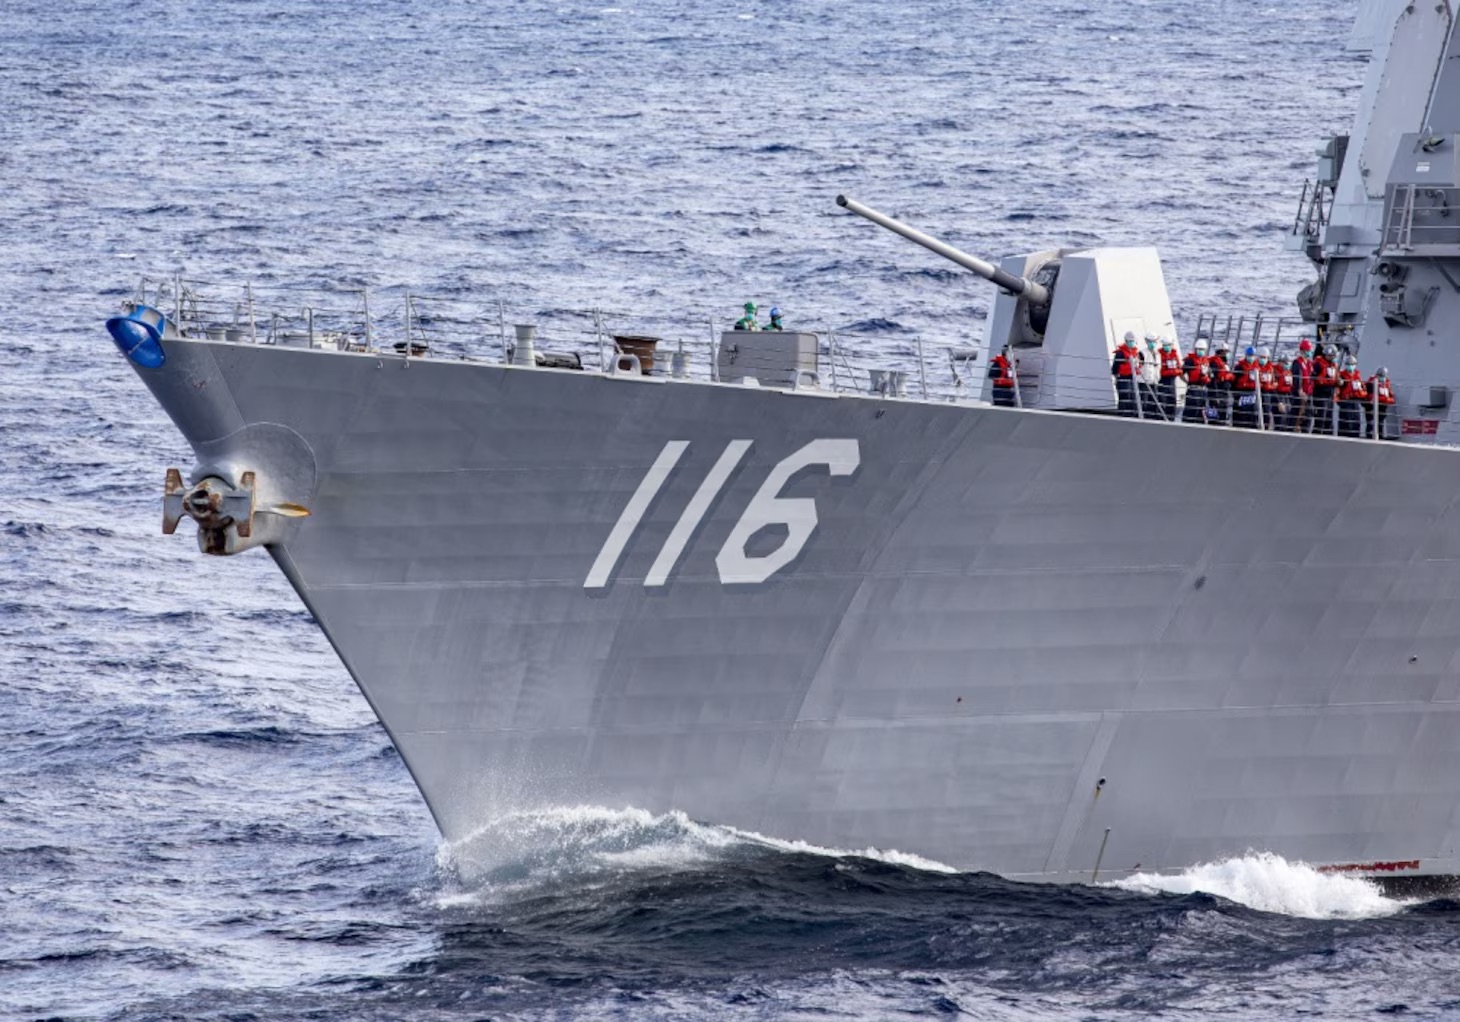 The Arleigh Burke-class guided-missile destroyer USS Thomas Hudner (DDG 116) transits the Atlantic Ocean